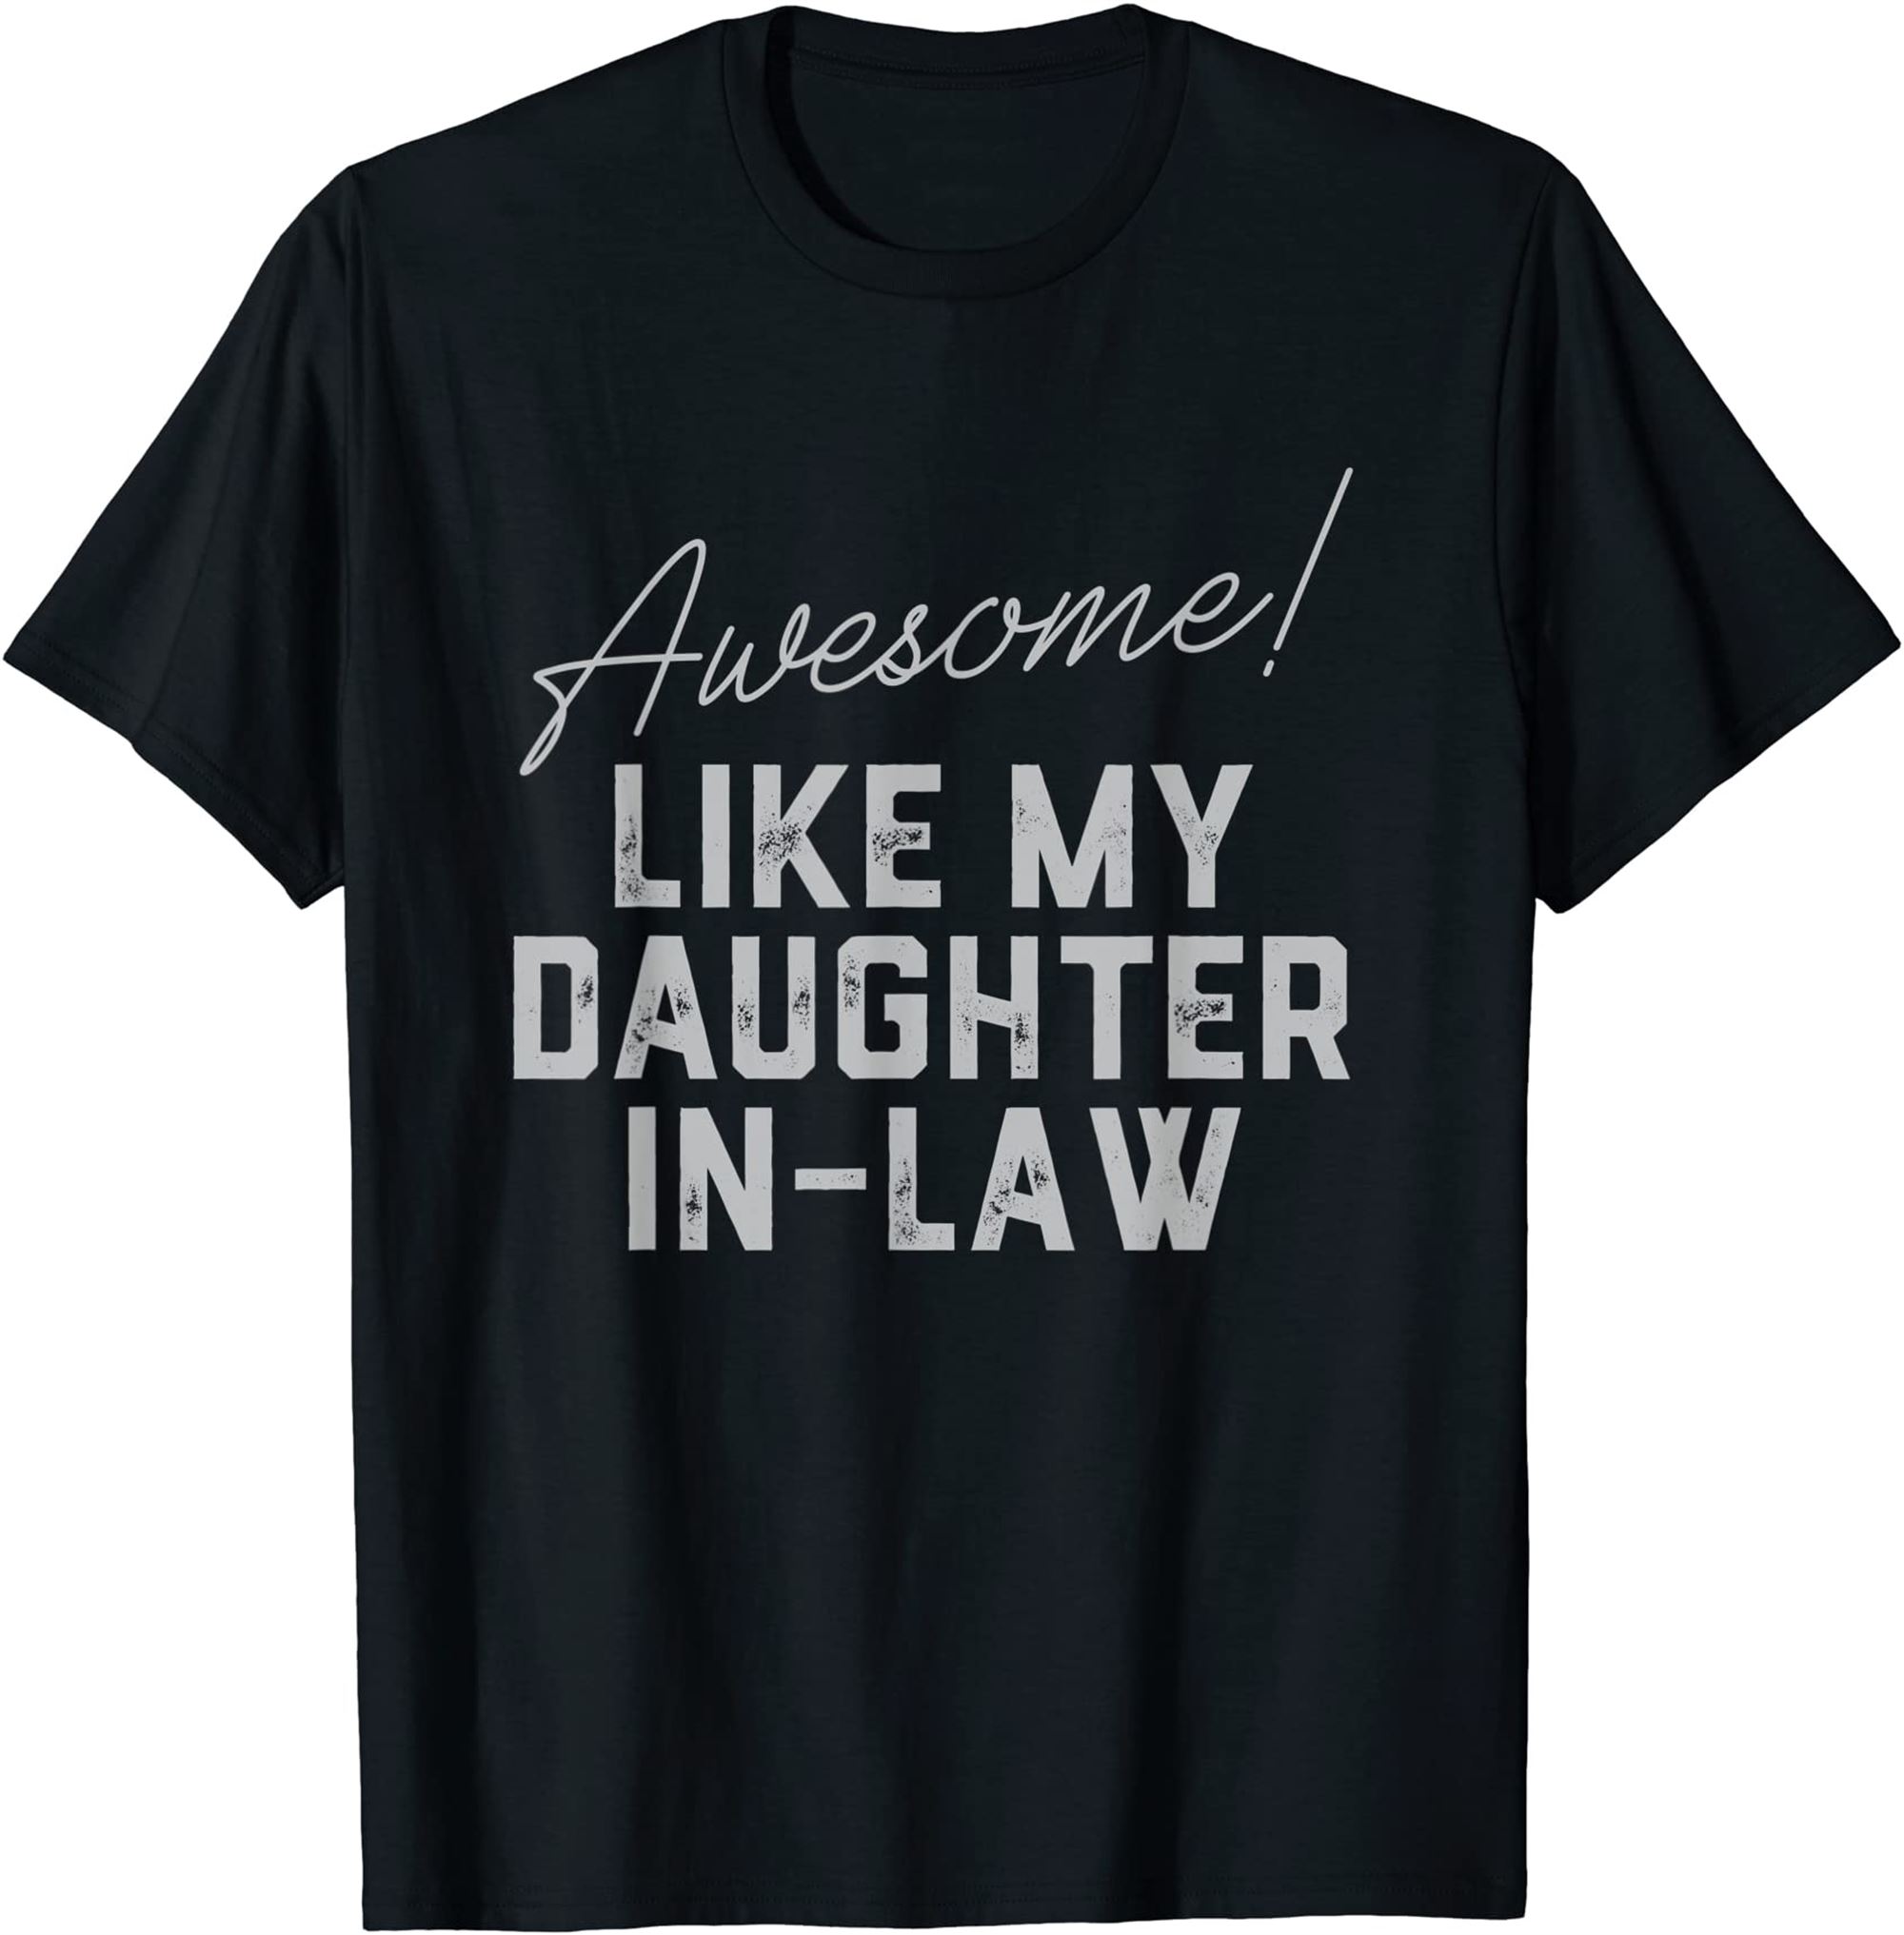 Awesome Like My Daughter In Law Family Lovers T-shirt Full Size Up To 5xl